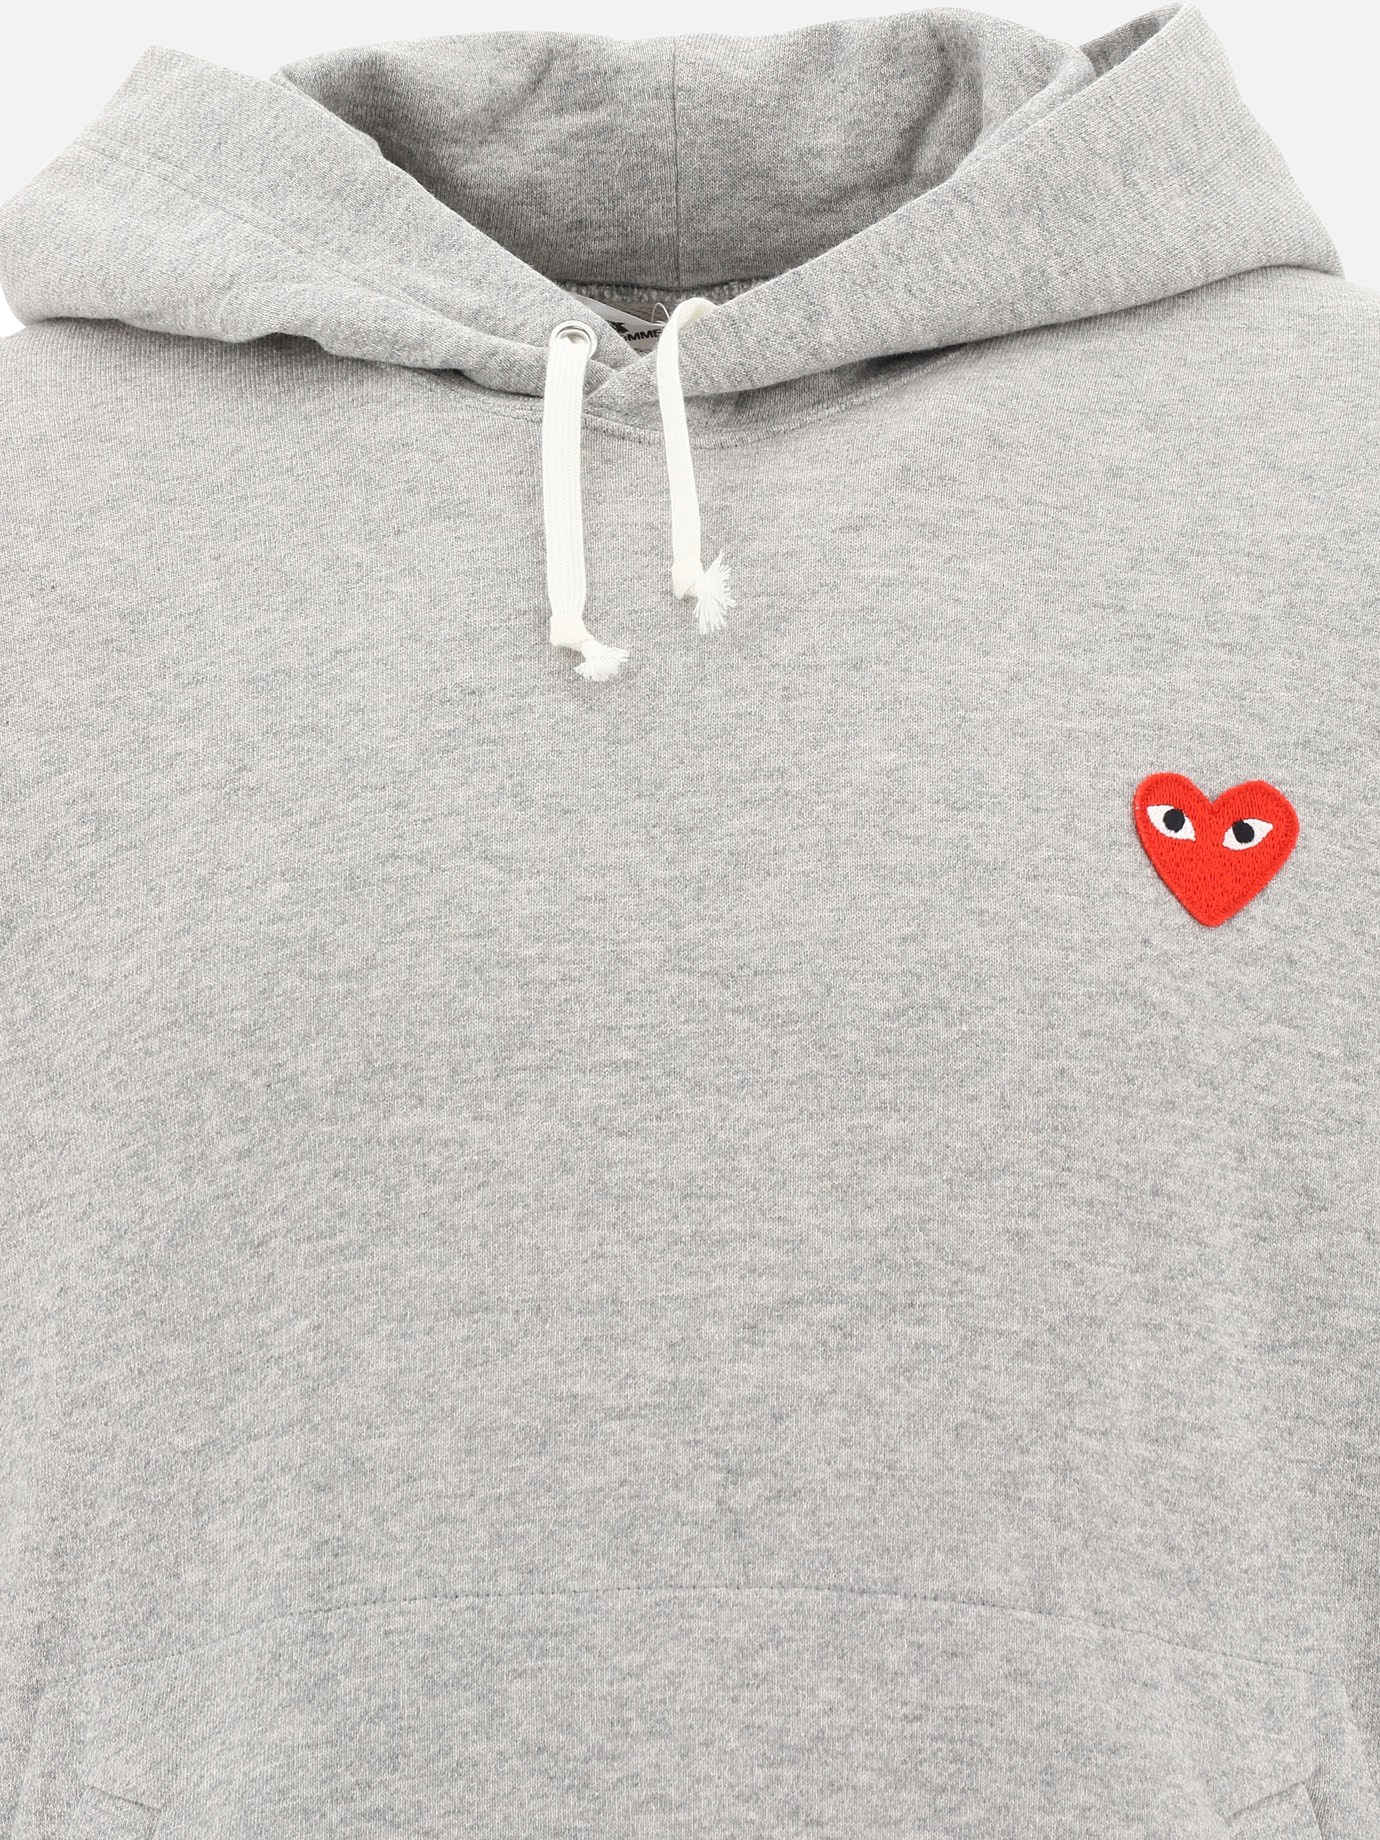  Heart  hoodie by Comme Des Garçons Play